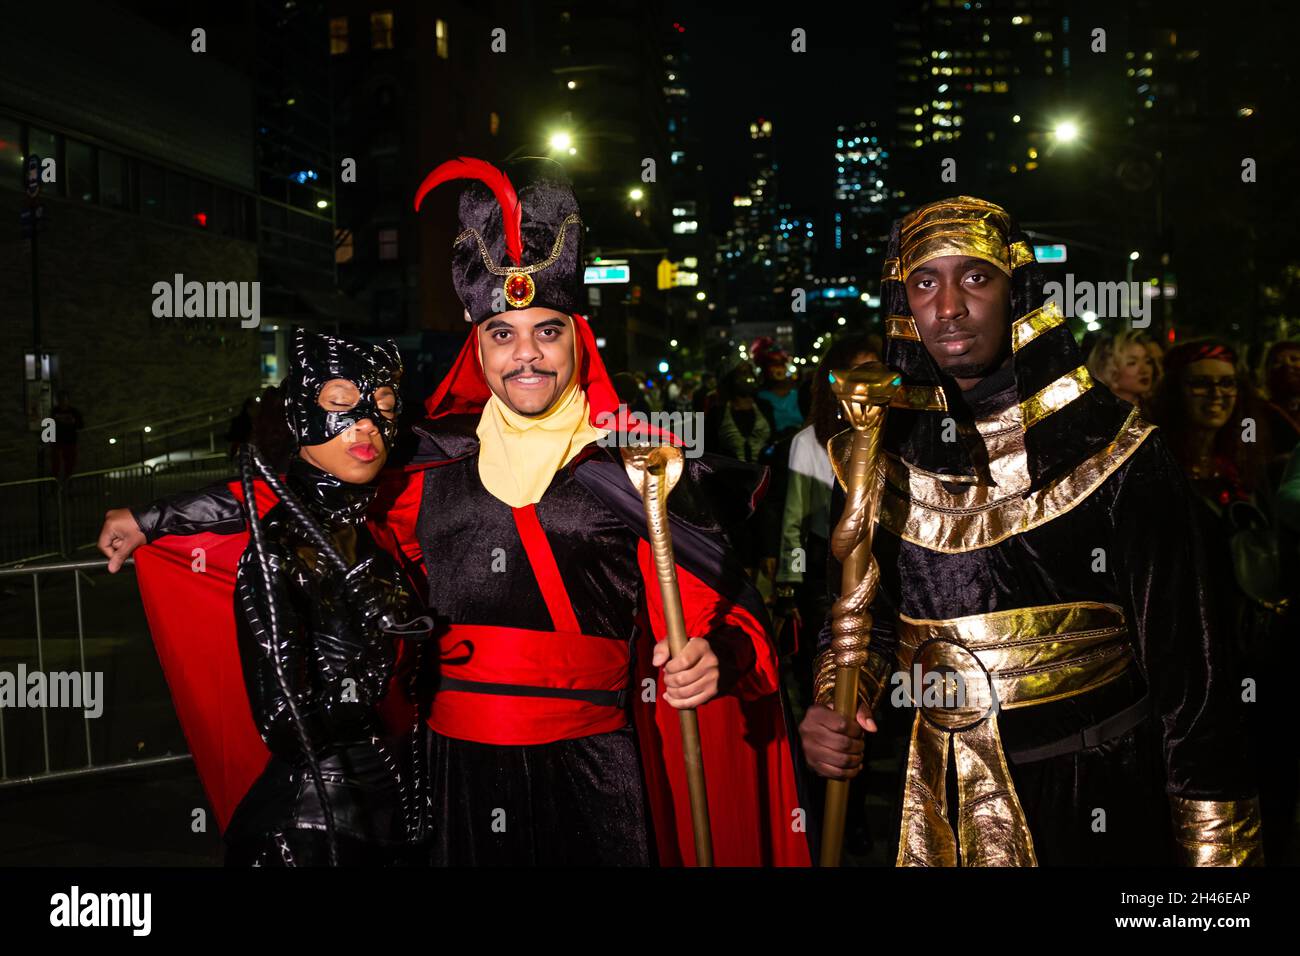 New York City, USA. 31st Oct, 2021. The annual Greenwich Village Halloween parade returned in 2021after a year's suspension because of COVID restrictions. Two men costumed as ancient Egyptian royalty with a woman in a black latex catsuit. Credit: Ed Lefkowicz/Alamy Live News Stock Photo